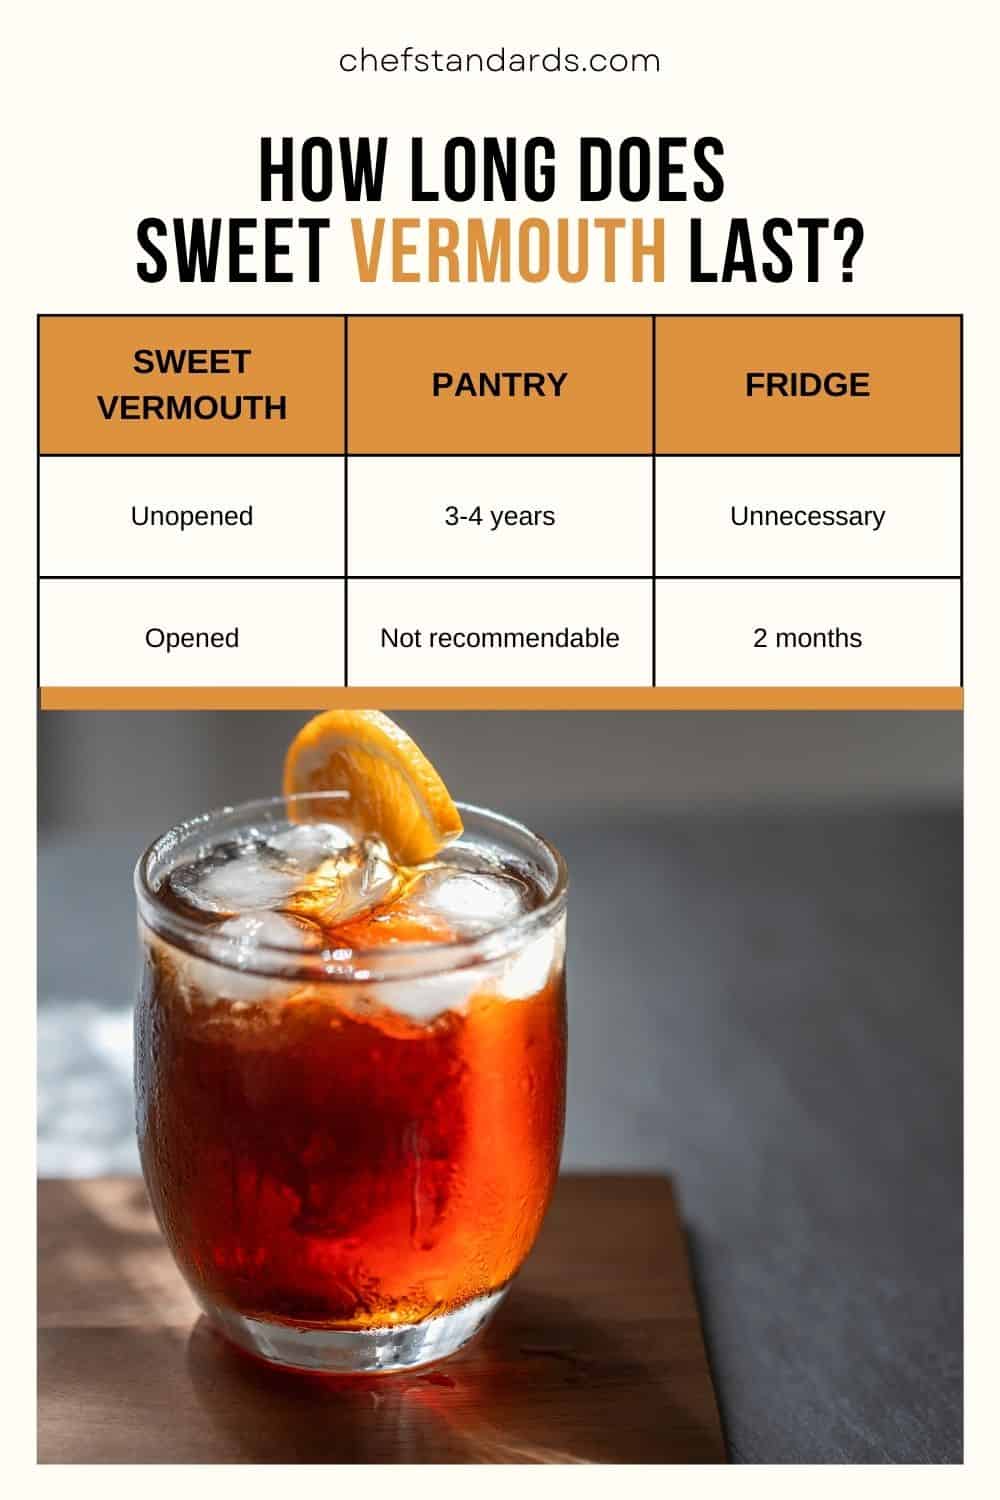 How Long Does Sweet Vermouth Last